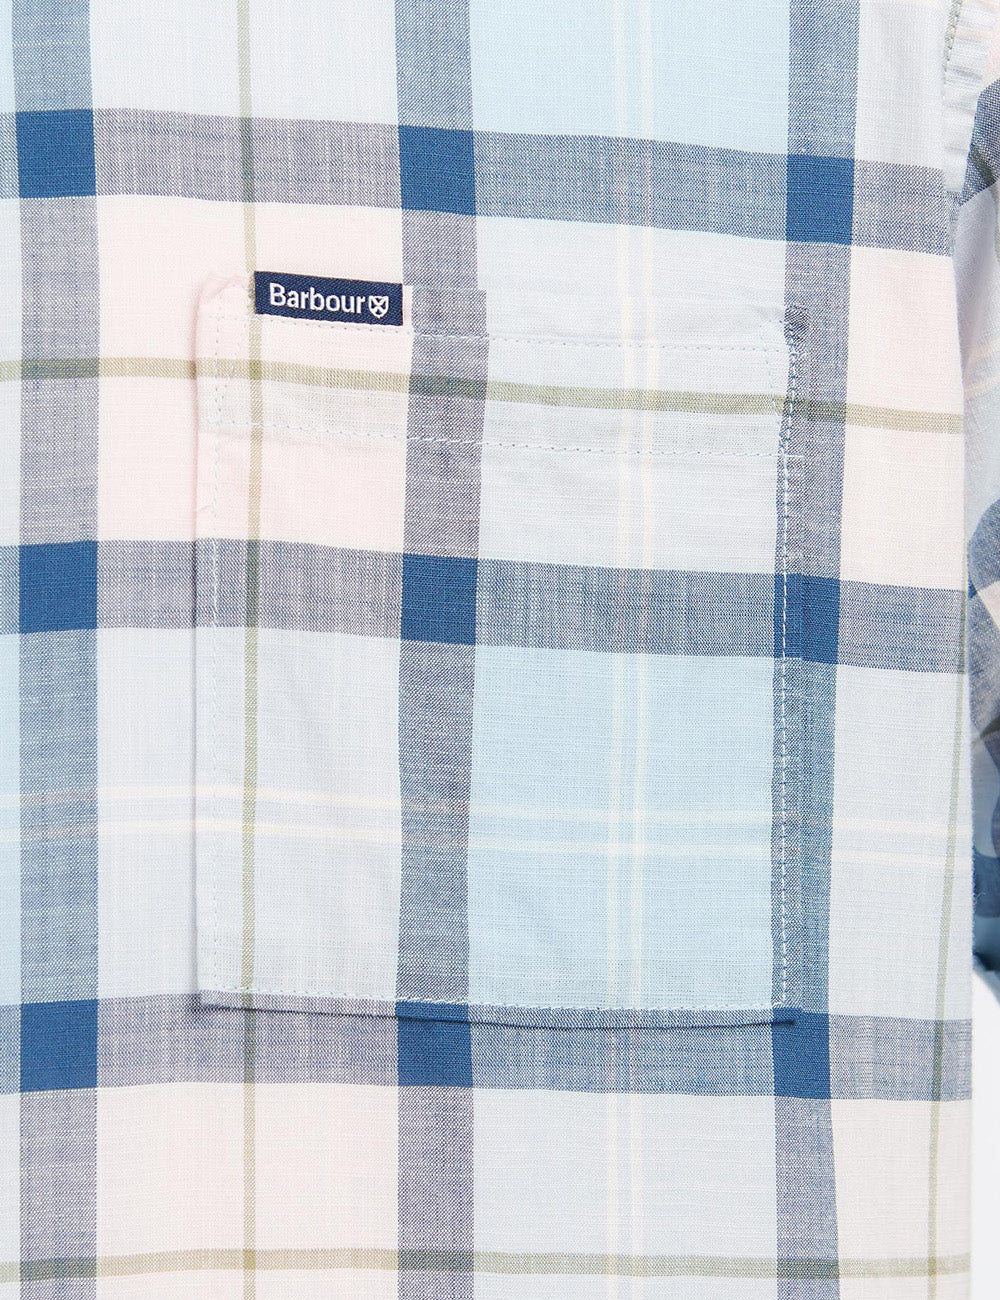 Close up of patch pocket and Barbour branded label on the left chest of the shirt